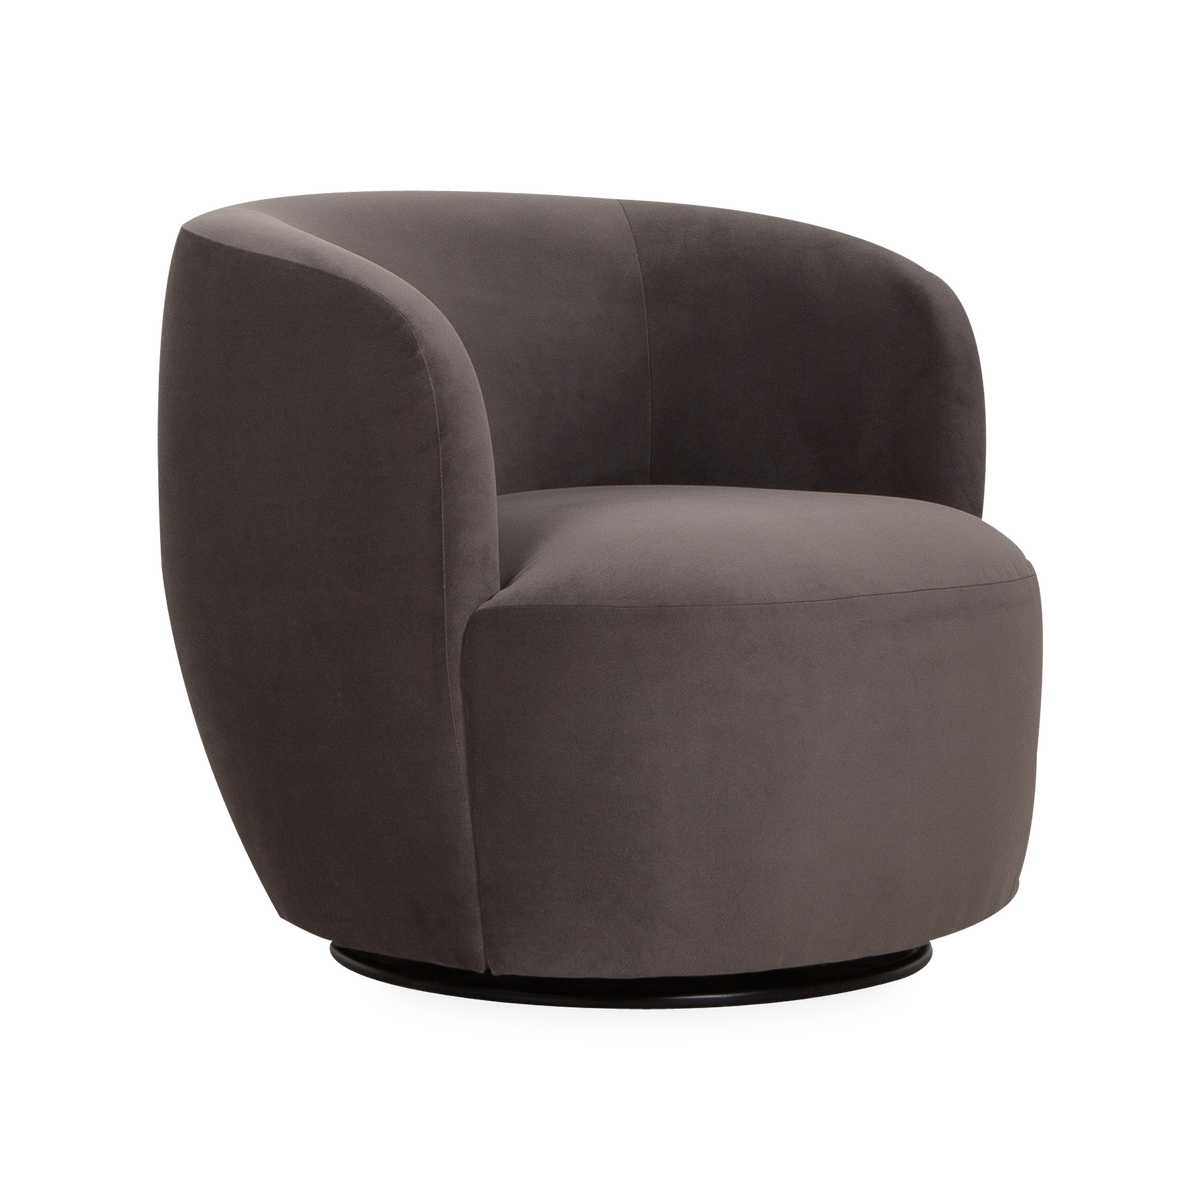 With its low profile, the Holden Swivel Chair invites you in for some rest and relaxation.